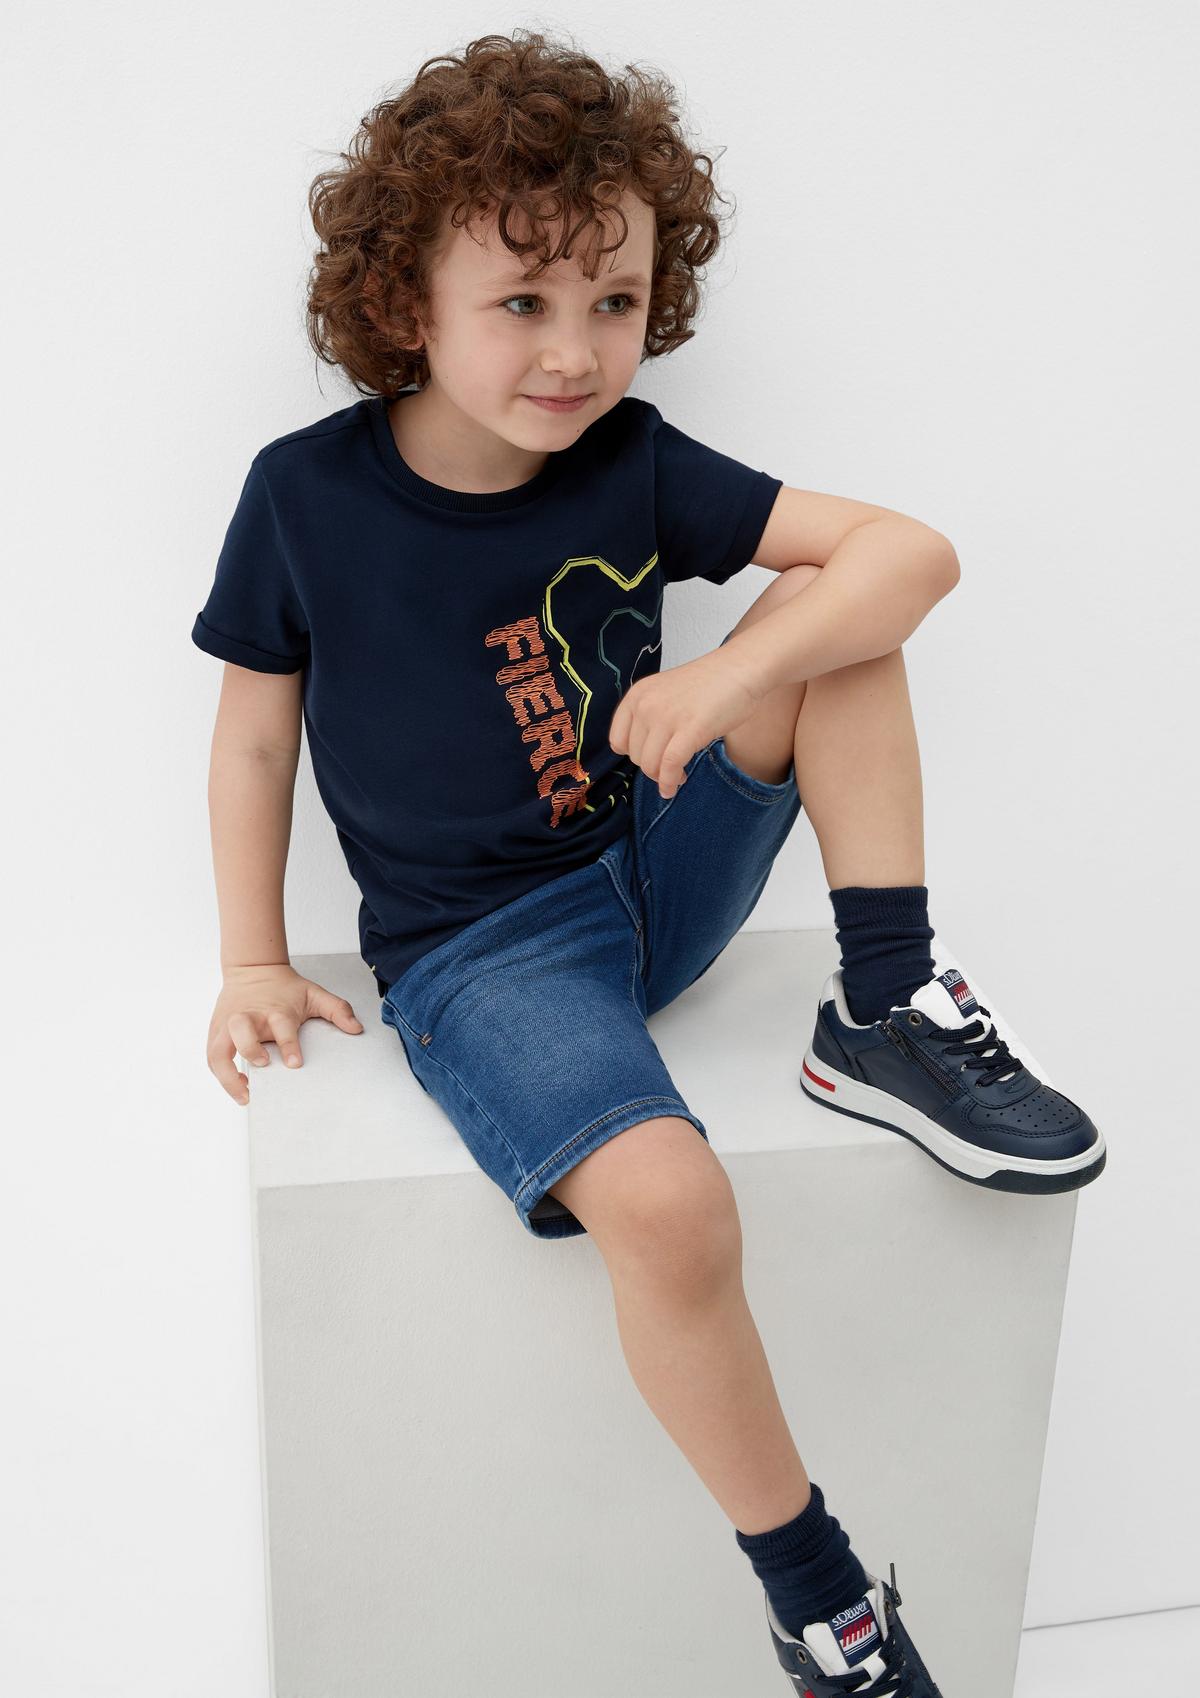 shorts online Find boys Bermuda for and teens